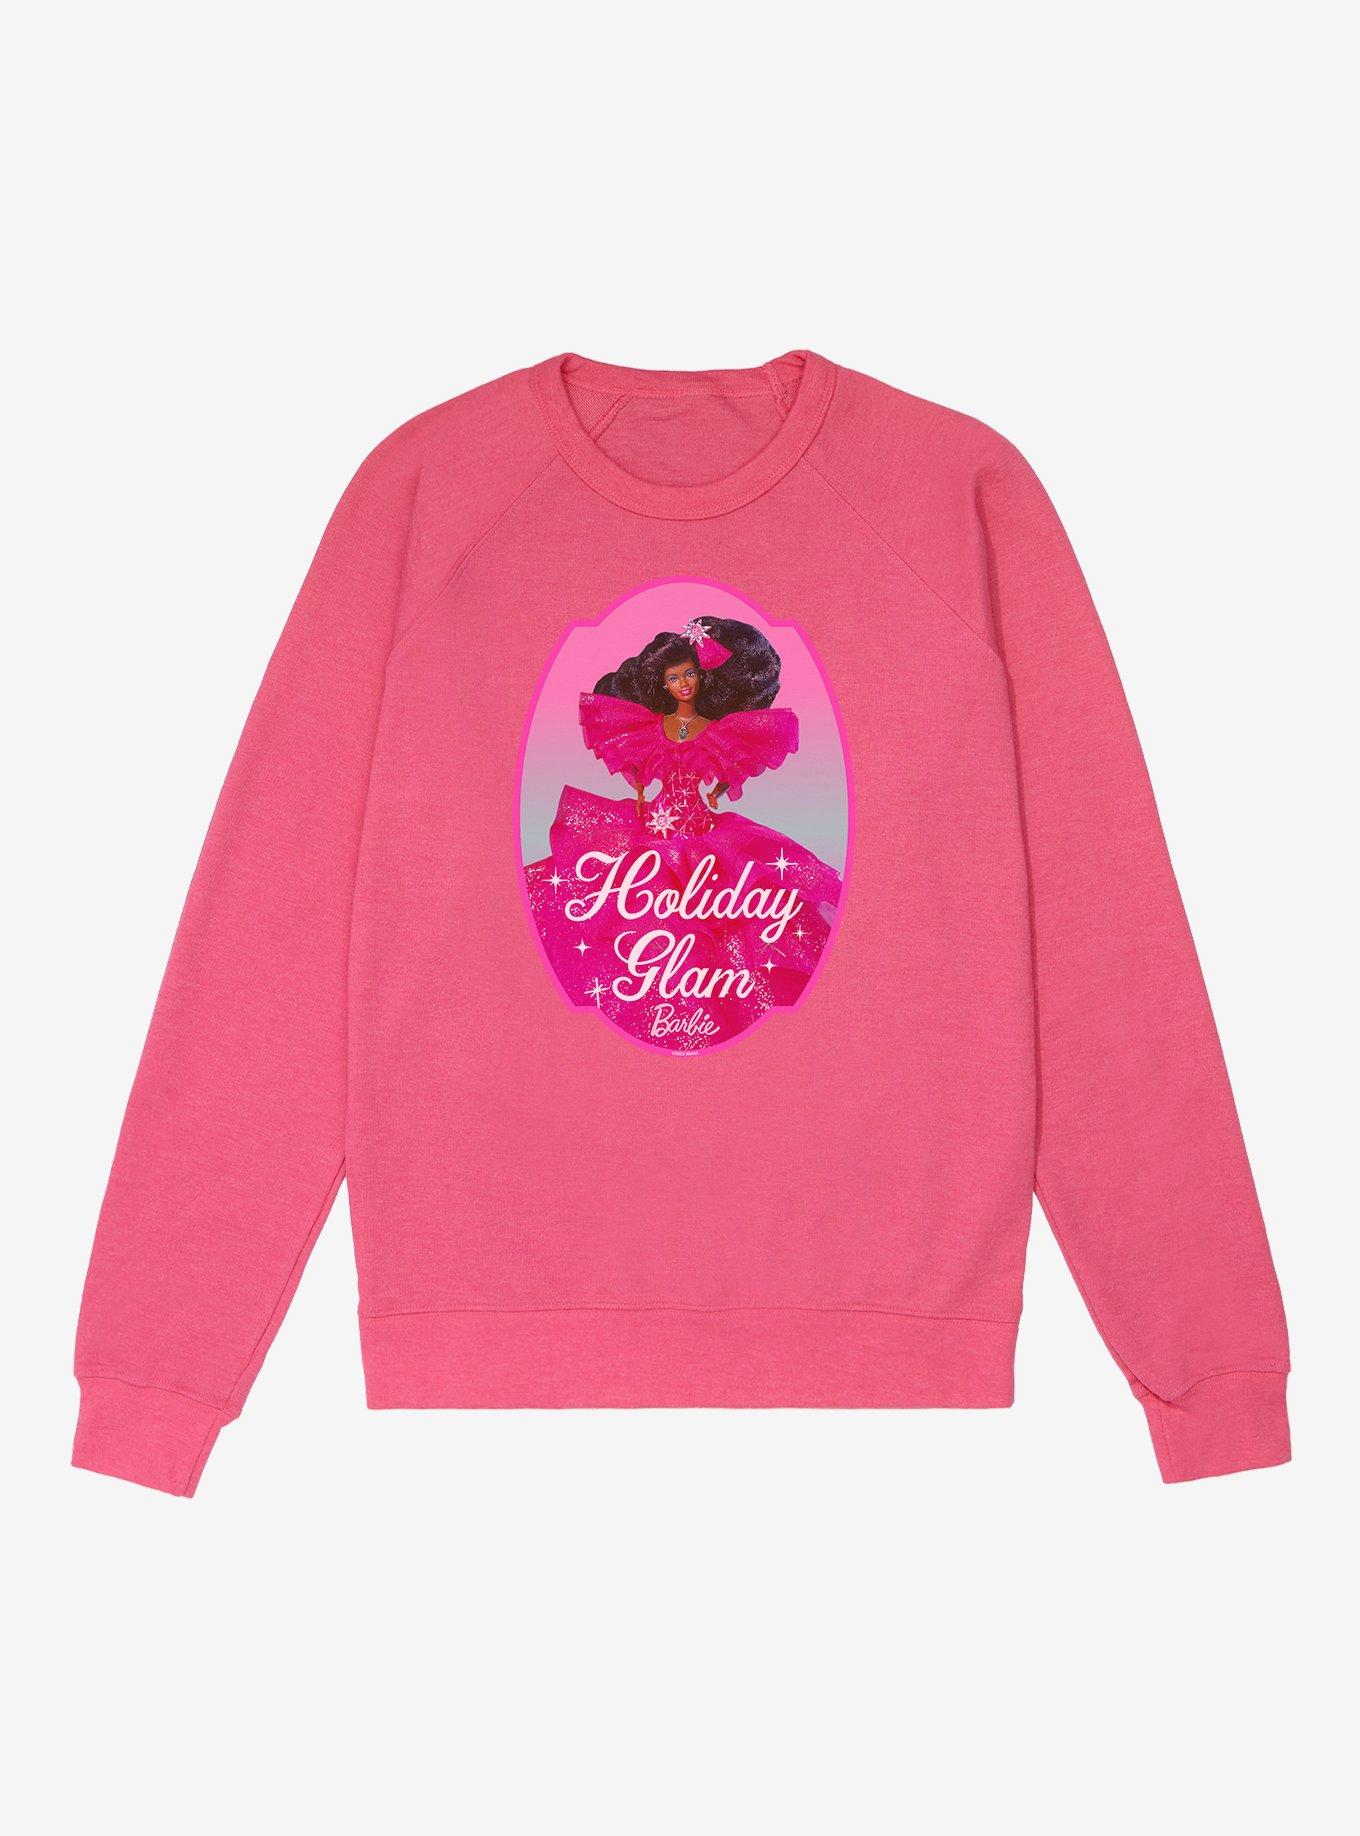 Barbie Holiday Glam French Terry Sweatshirt, HELICONIA HEATHER, hi-res